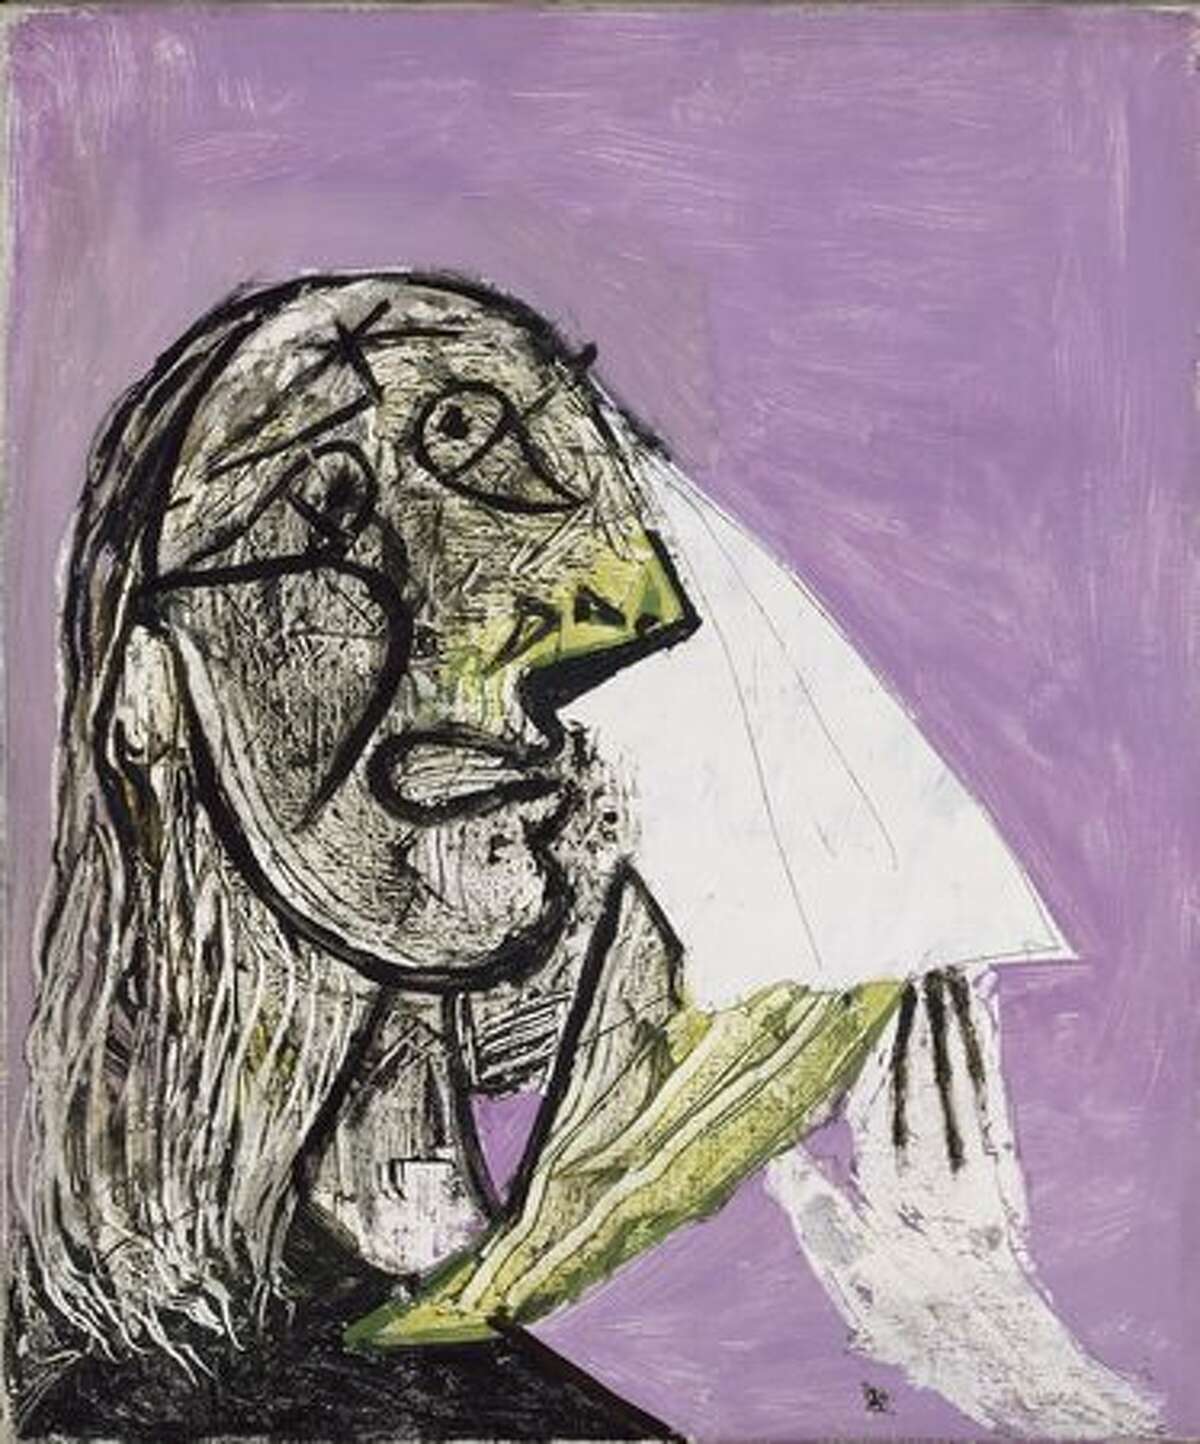 Weeping Woman, 1937. Oil on canvas, 55.3 x 46.3 cm.